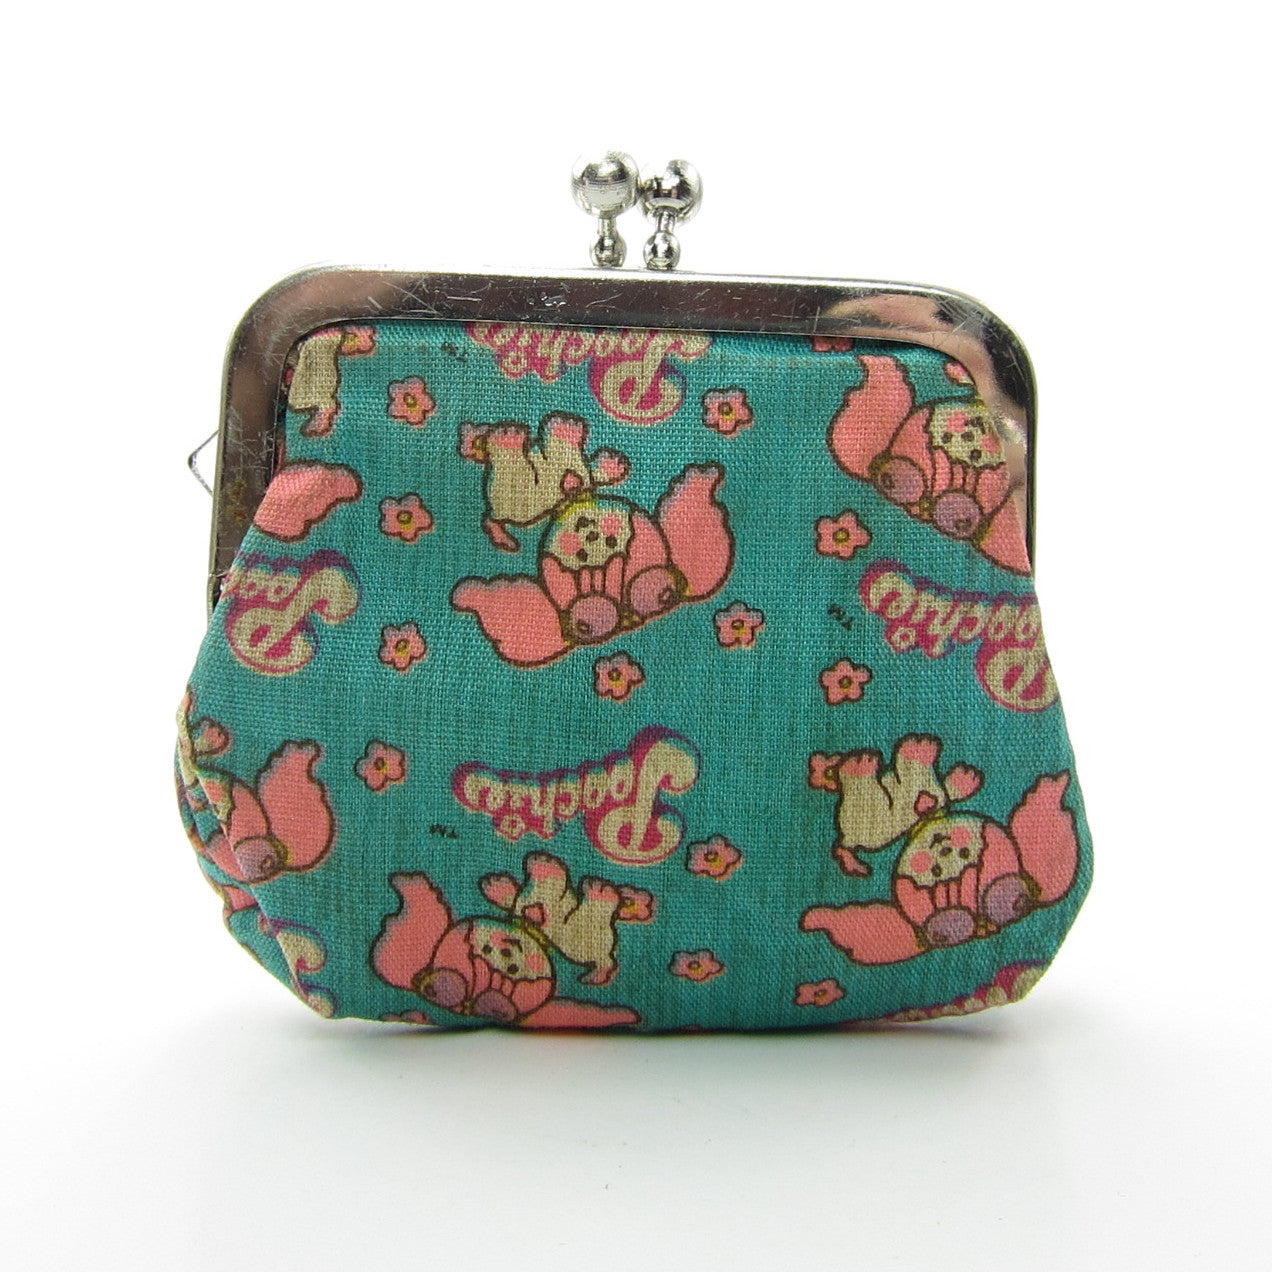 Poochie Vintage Kisslock Coin or Change Purse from Money & Memos